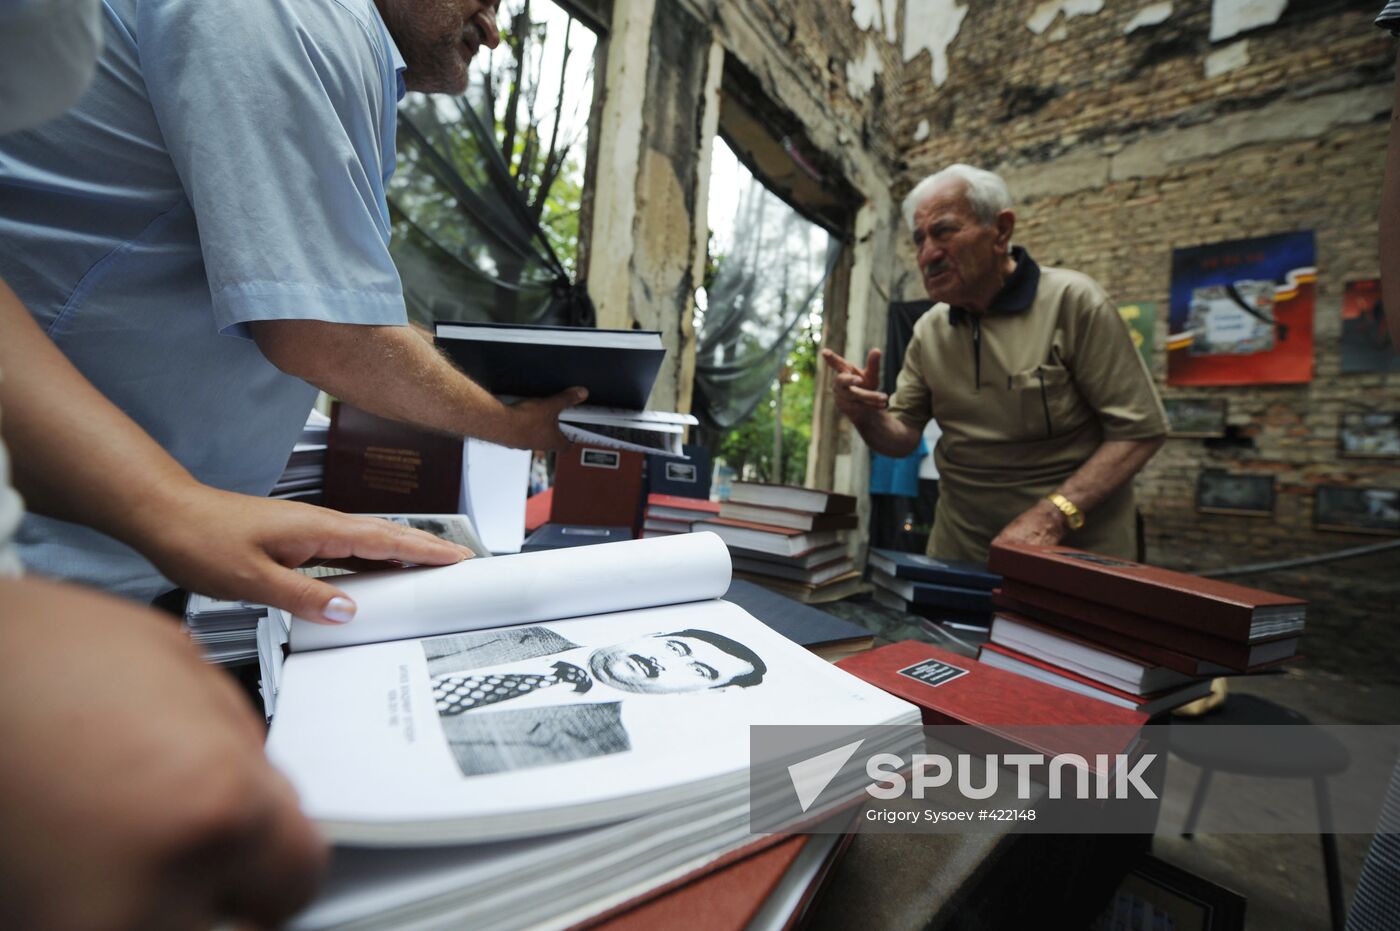 Genocide Museum opens in Tskhinvali